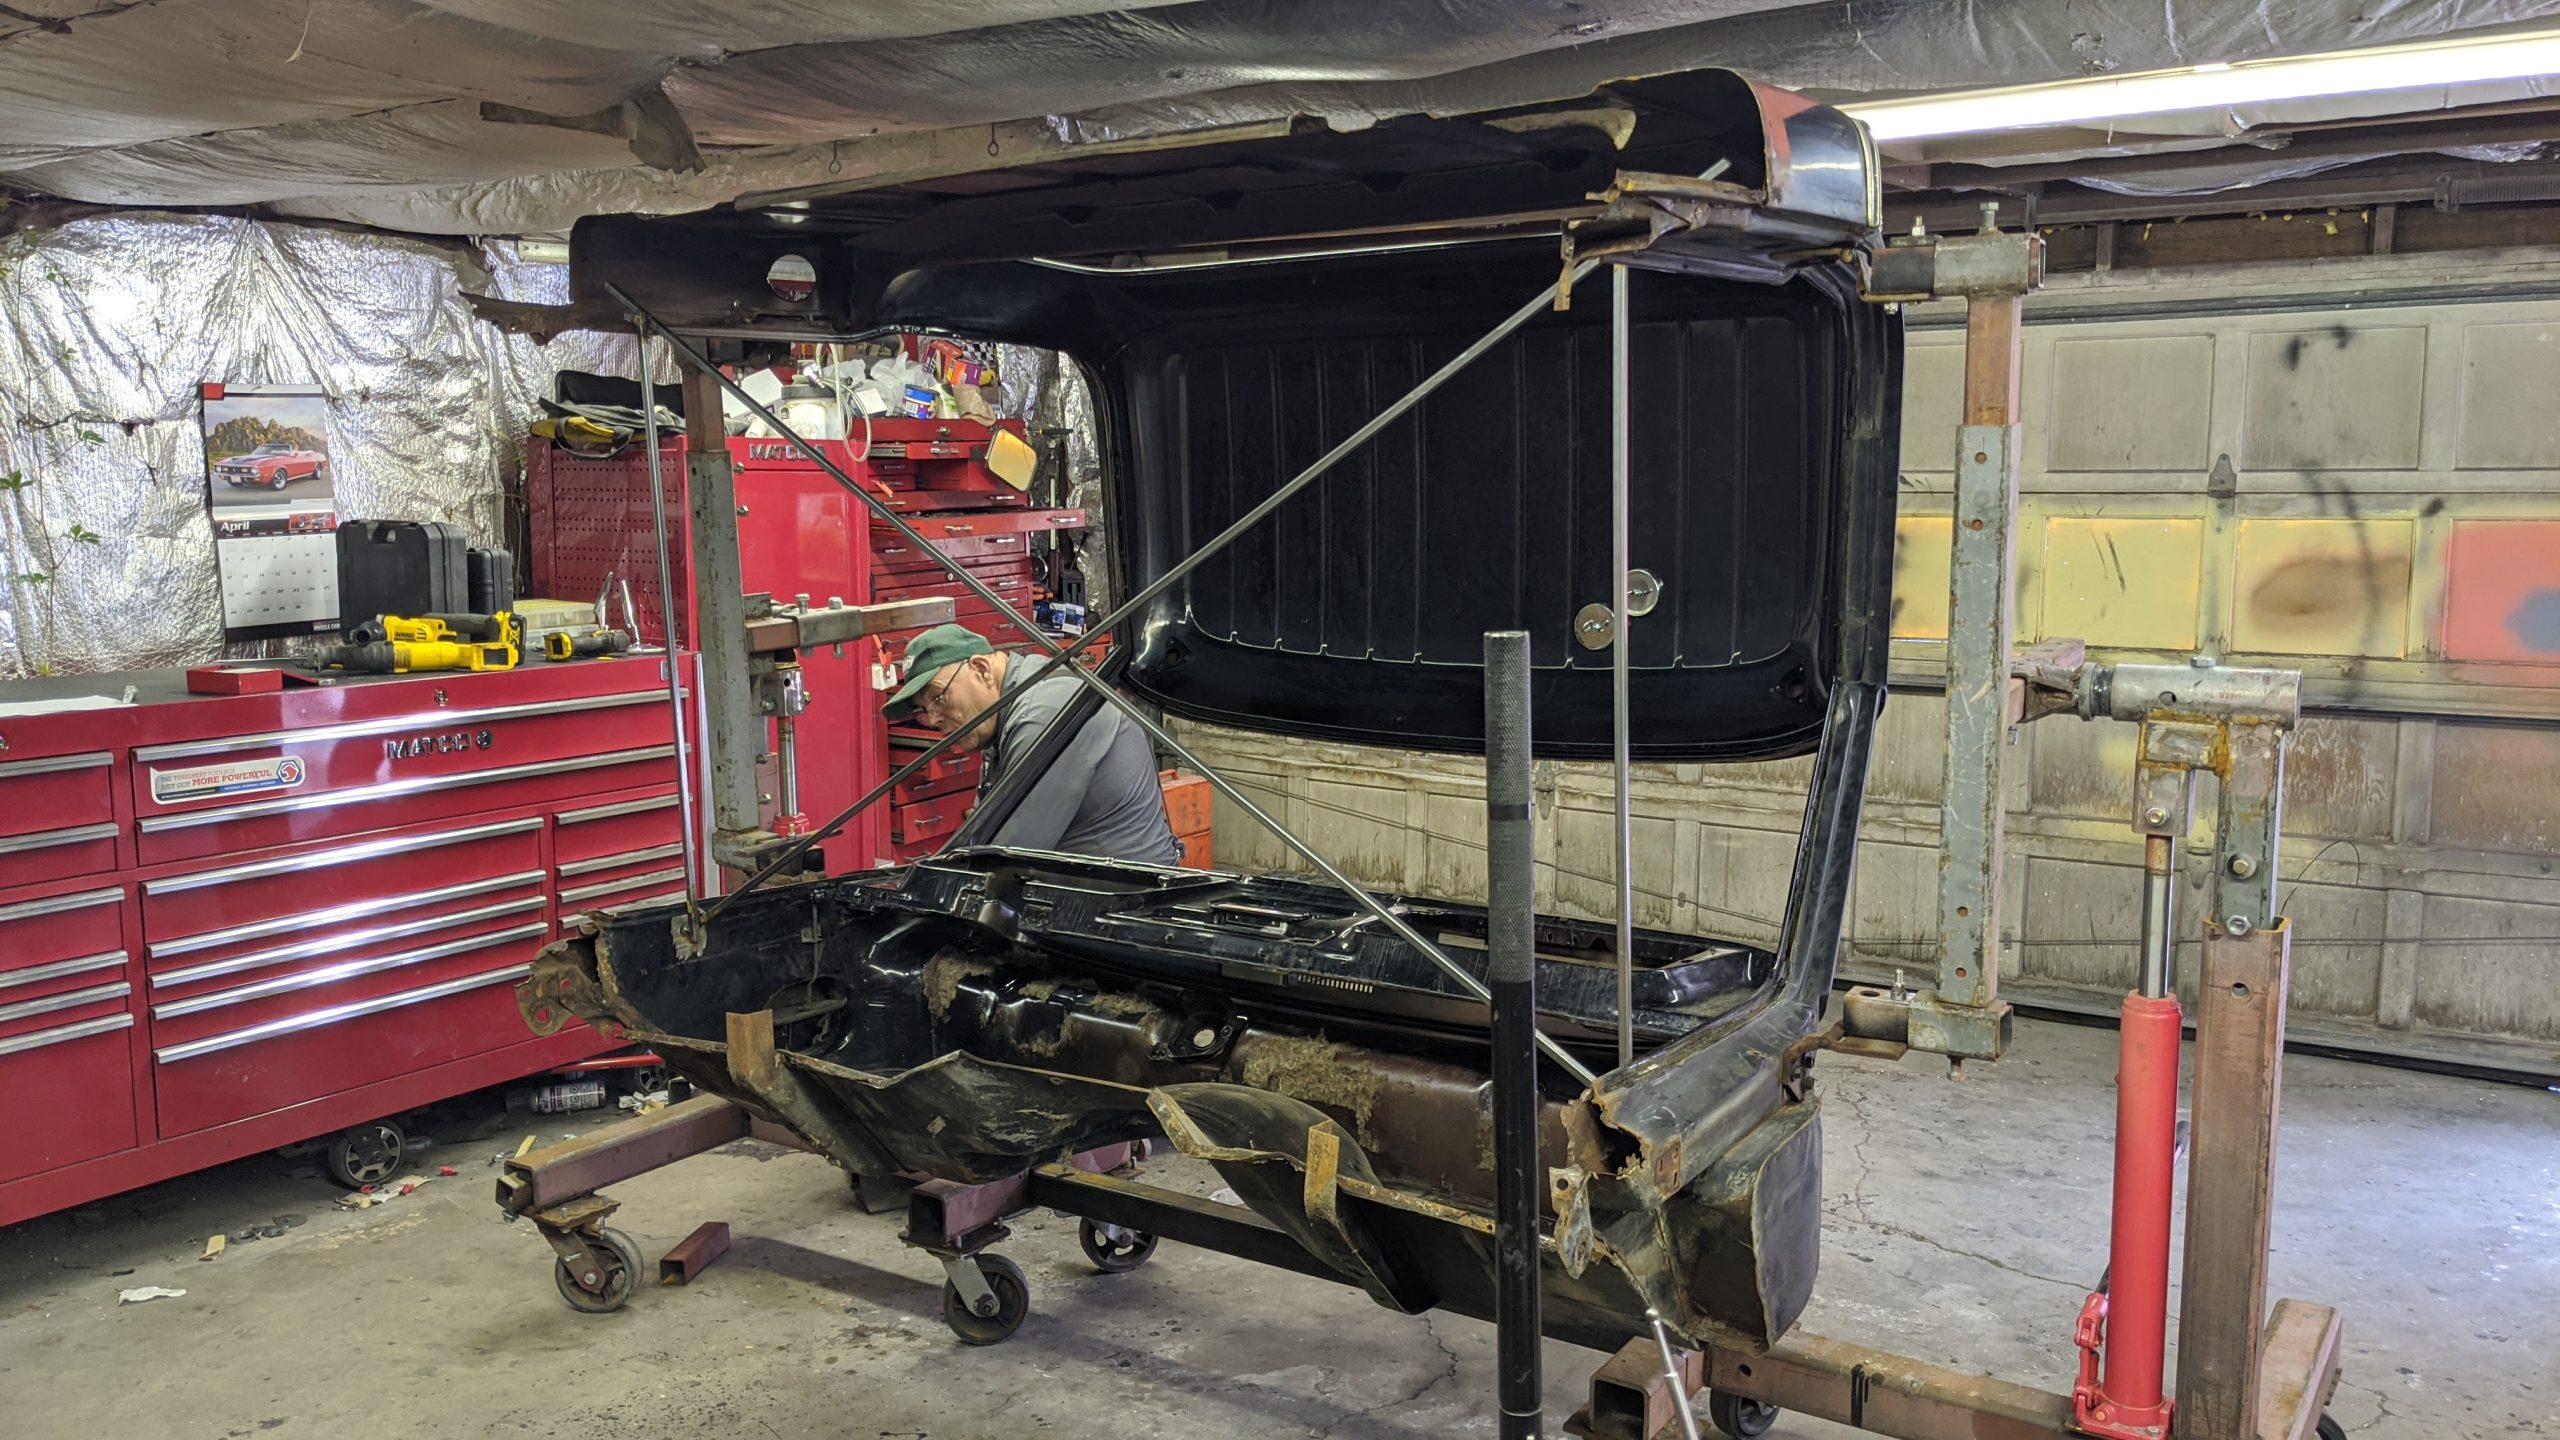 Mounting the cab on the rotisserie